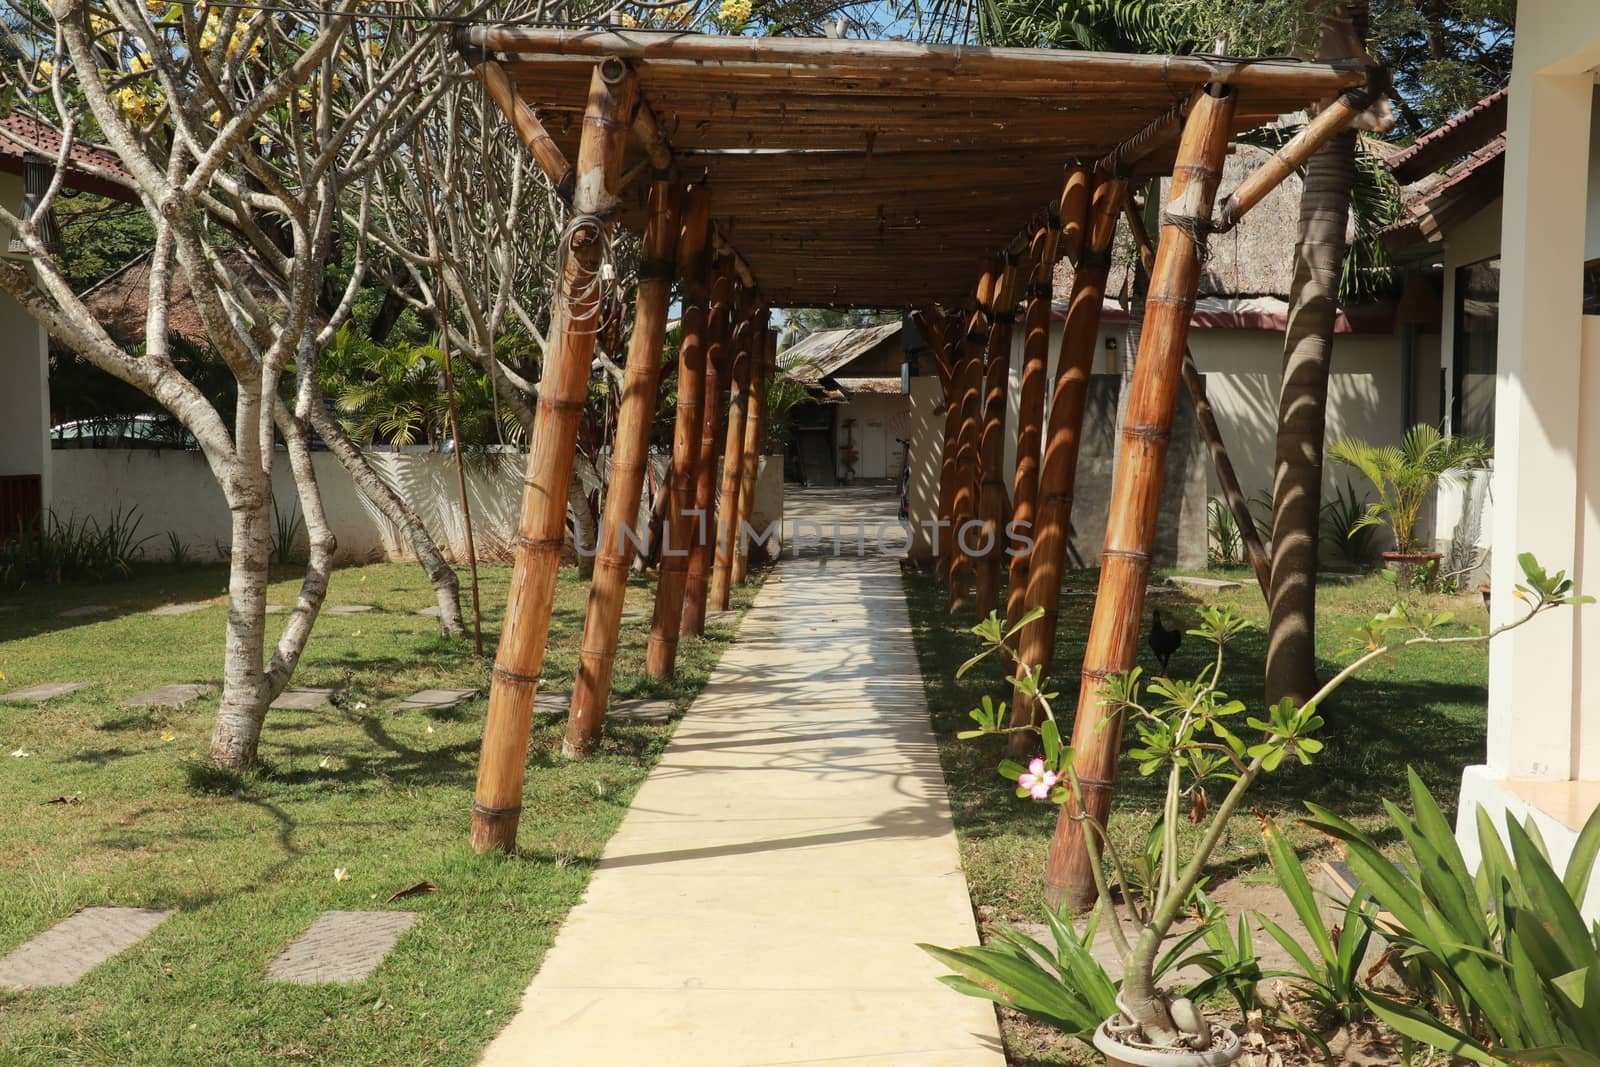 A concrete pavement path with bamboo roof. Bamboo roofing in a tropical garden.